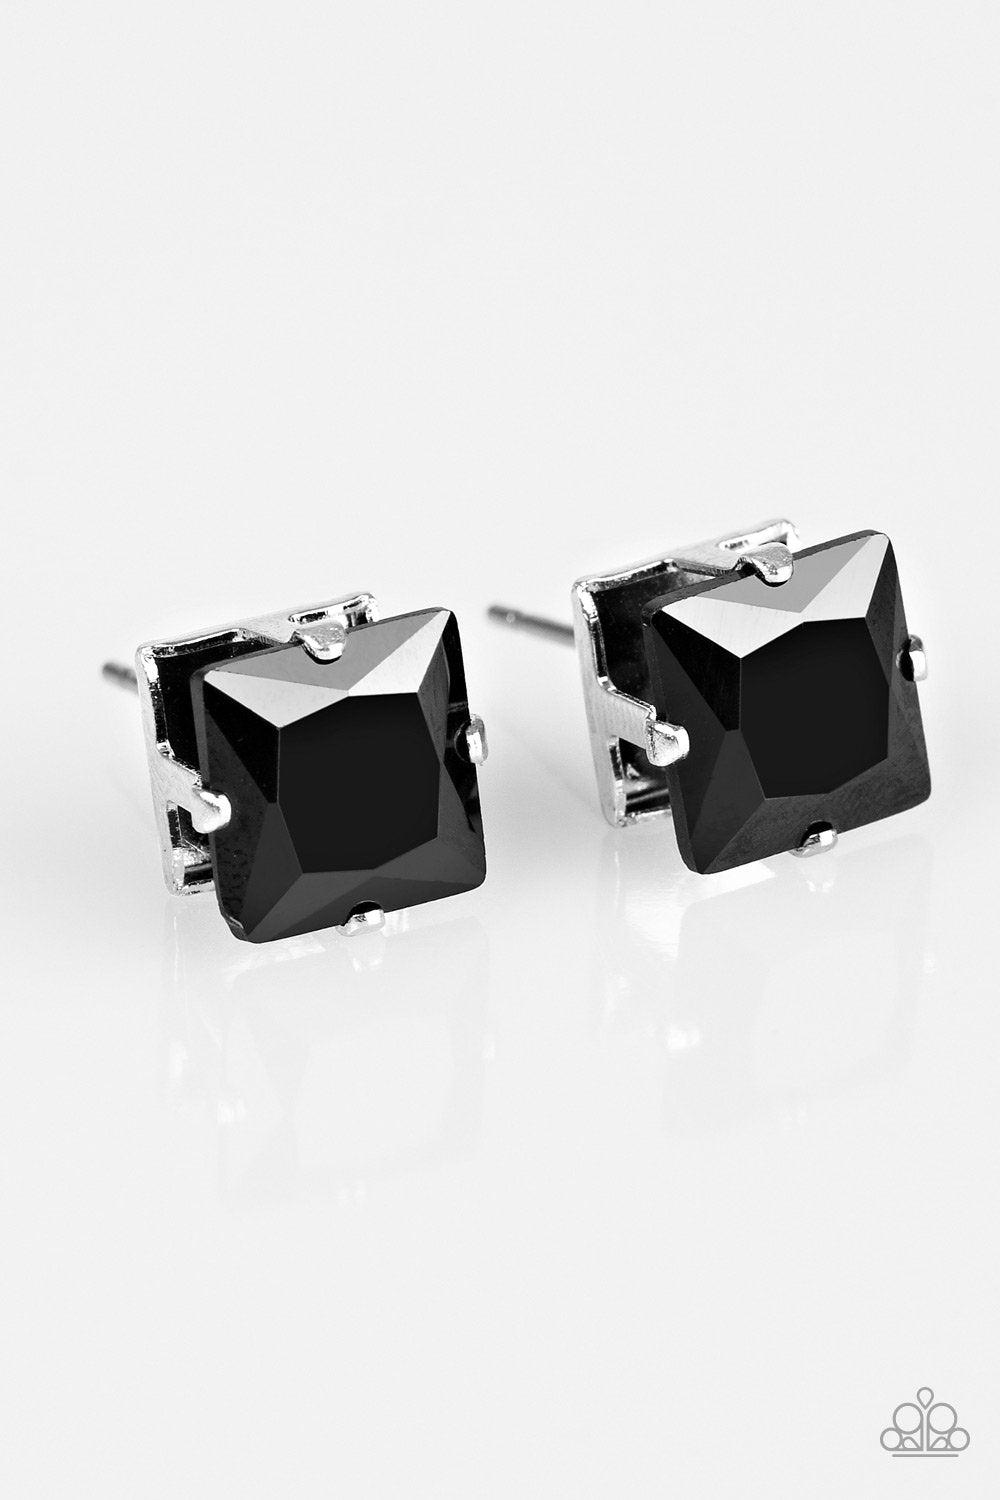 Girls Will Be Girls Black Post Earrings - Paparazzi Accessories-CarasShop.com - $5 Jewelry by Cara Jewels